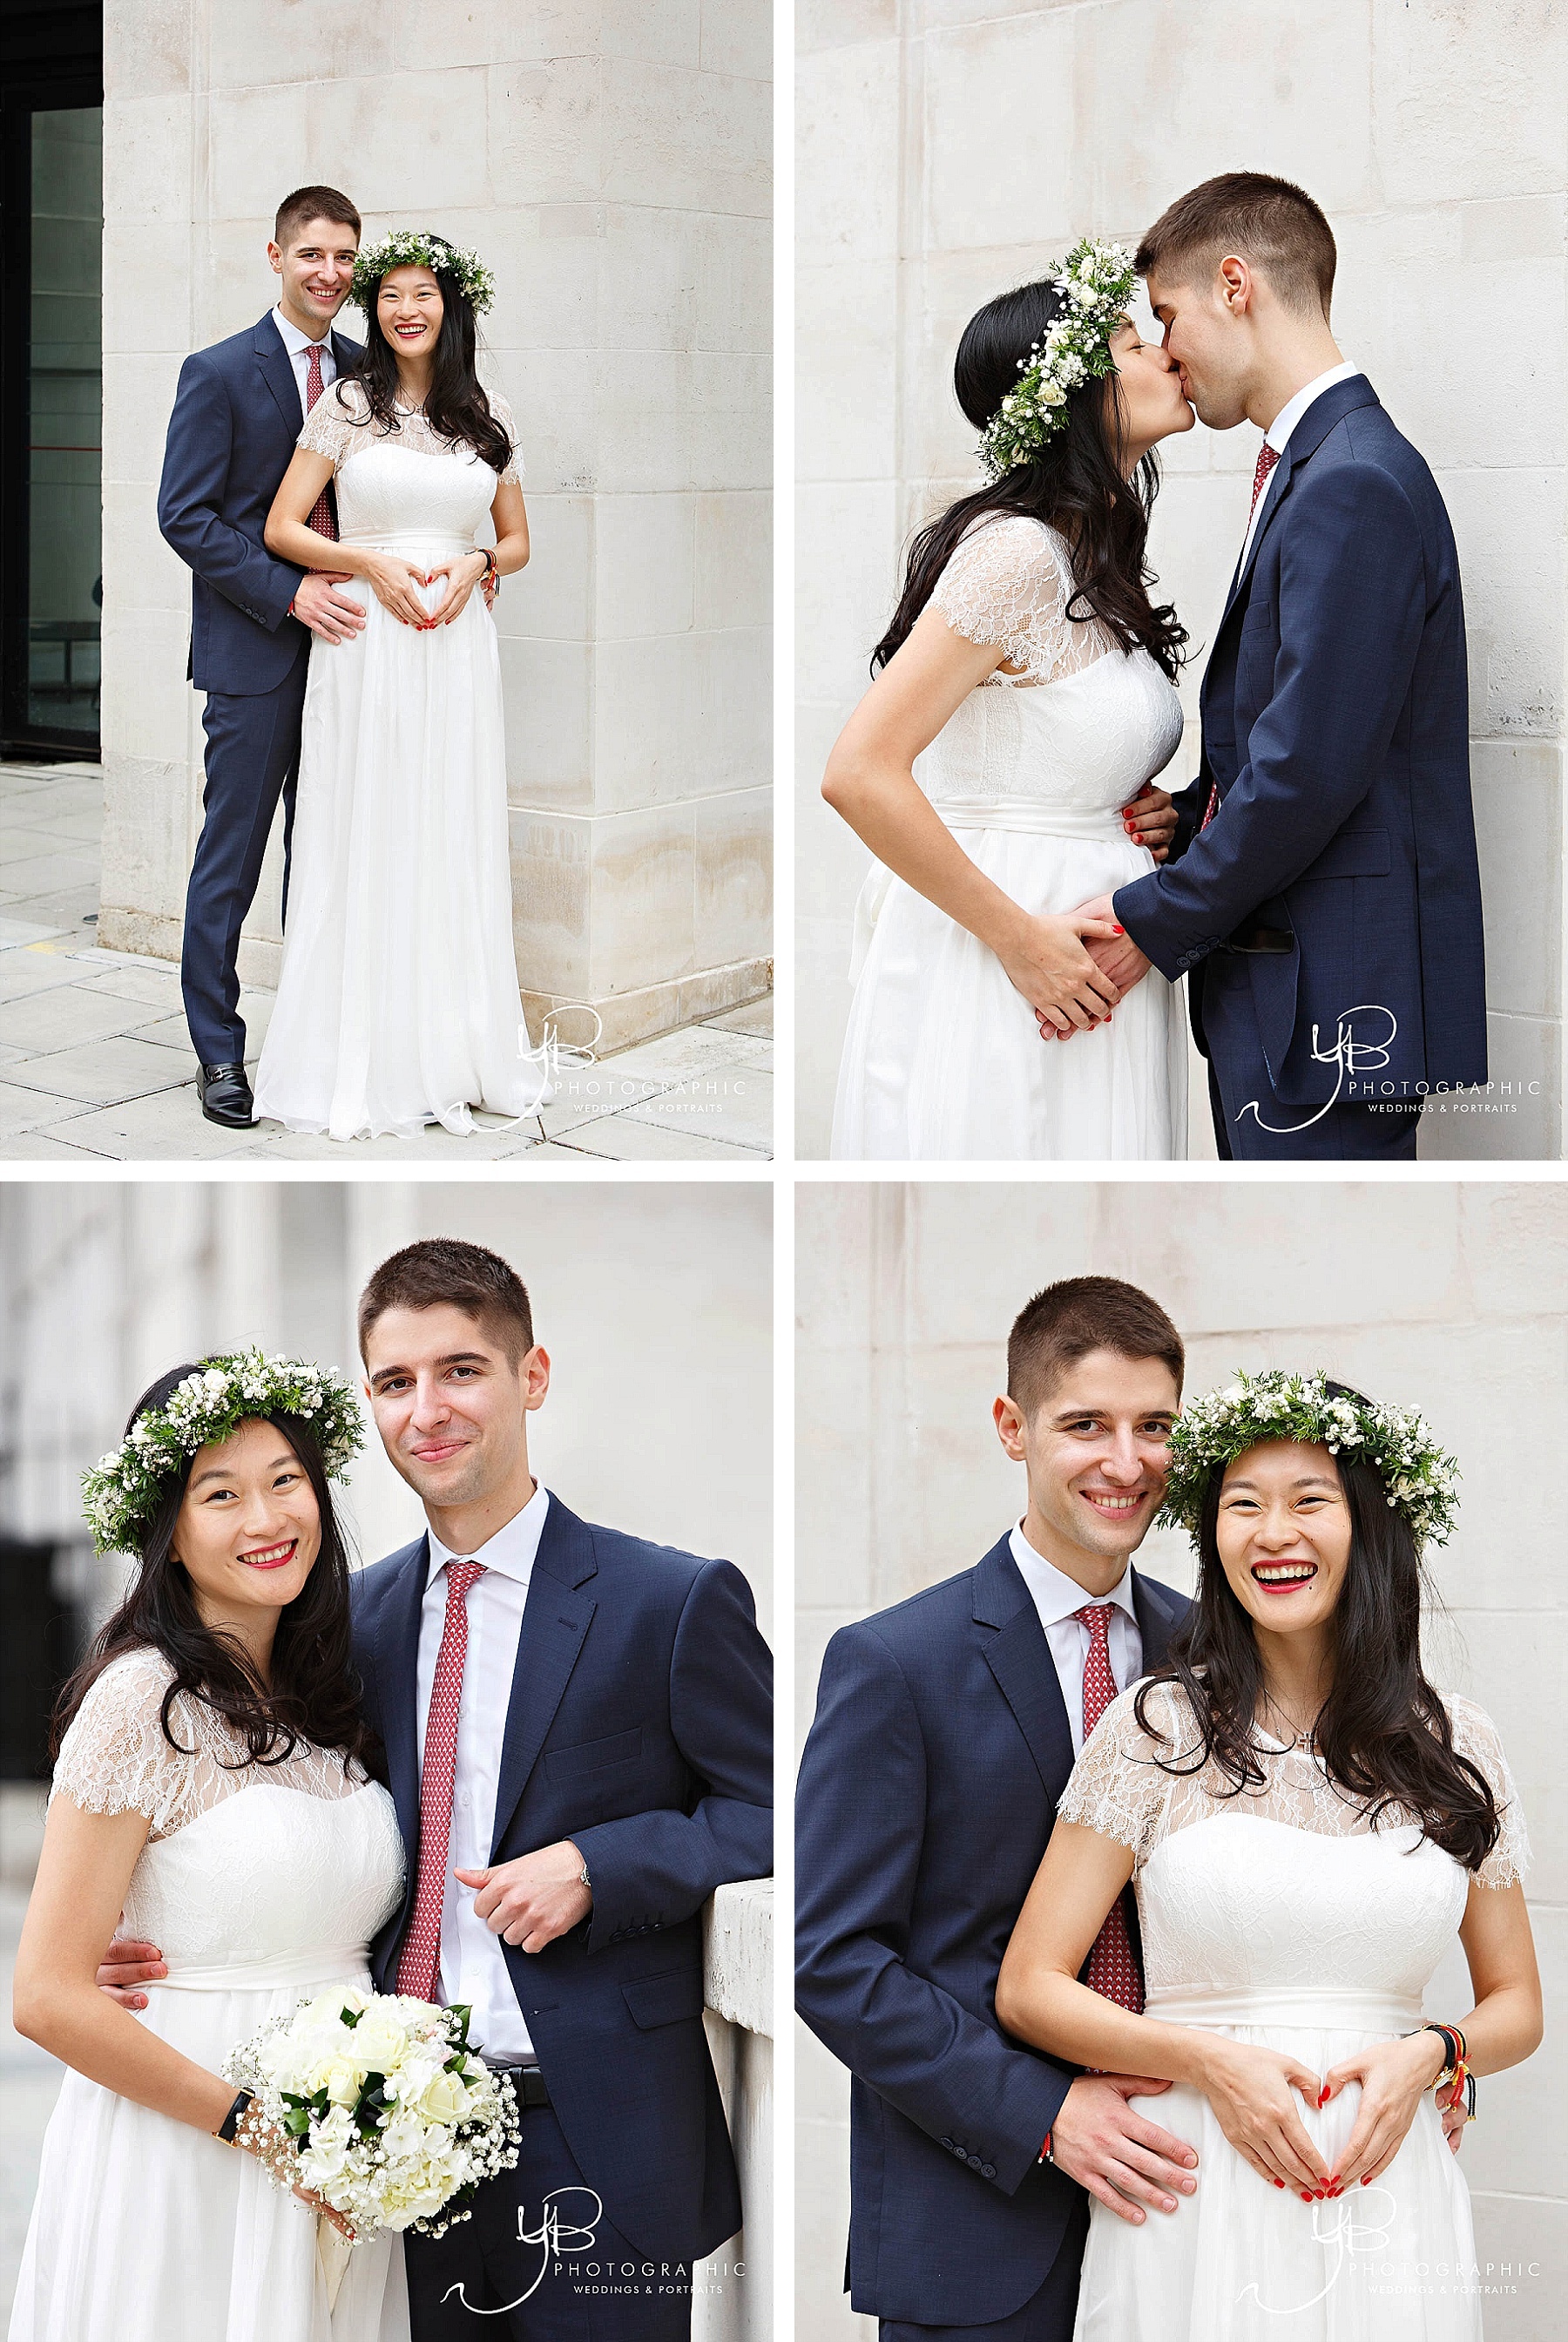 Wedding Portraits at the Old Marylebone Town Hall by YBPHOTOGRAPHIC